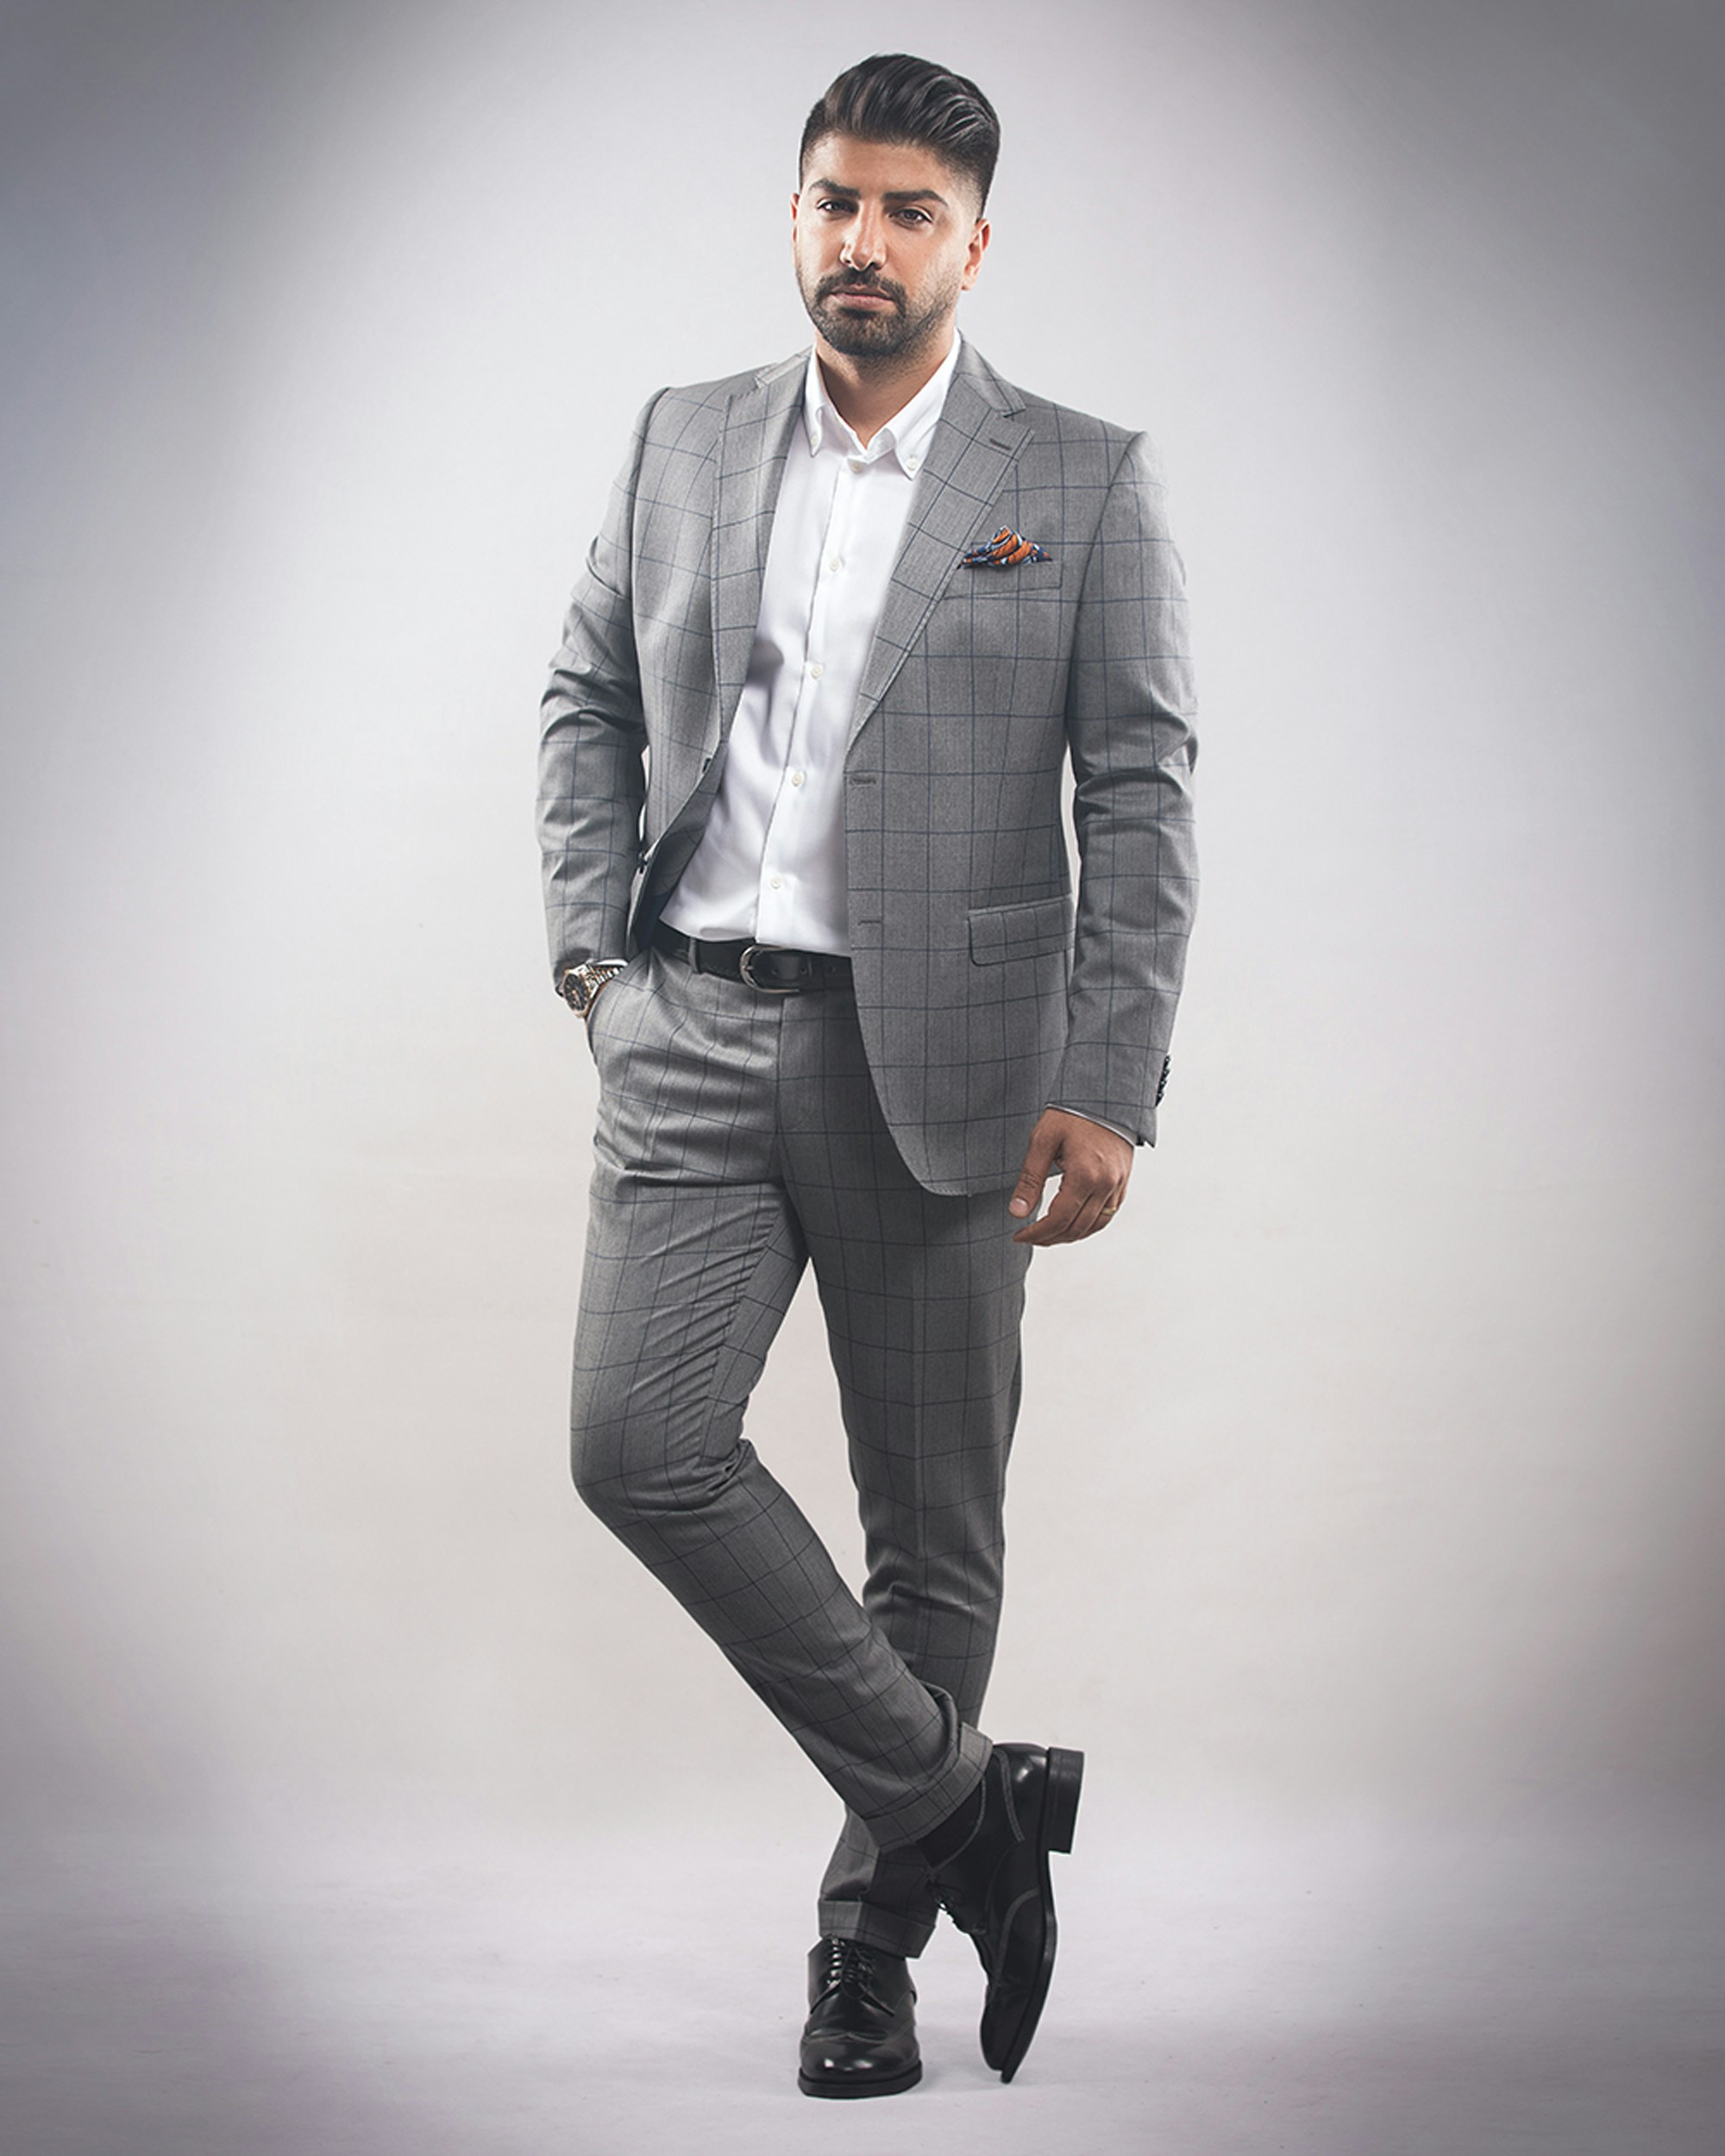 great photo recipe,how to photograph man in gray suit jacket and black dress pants